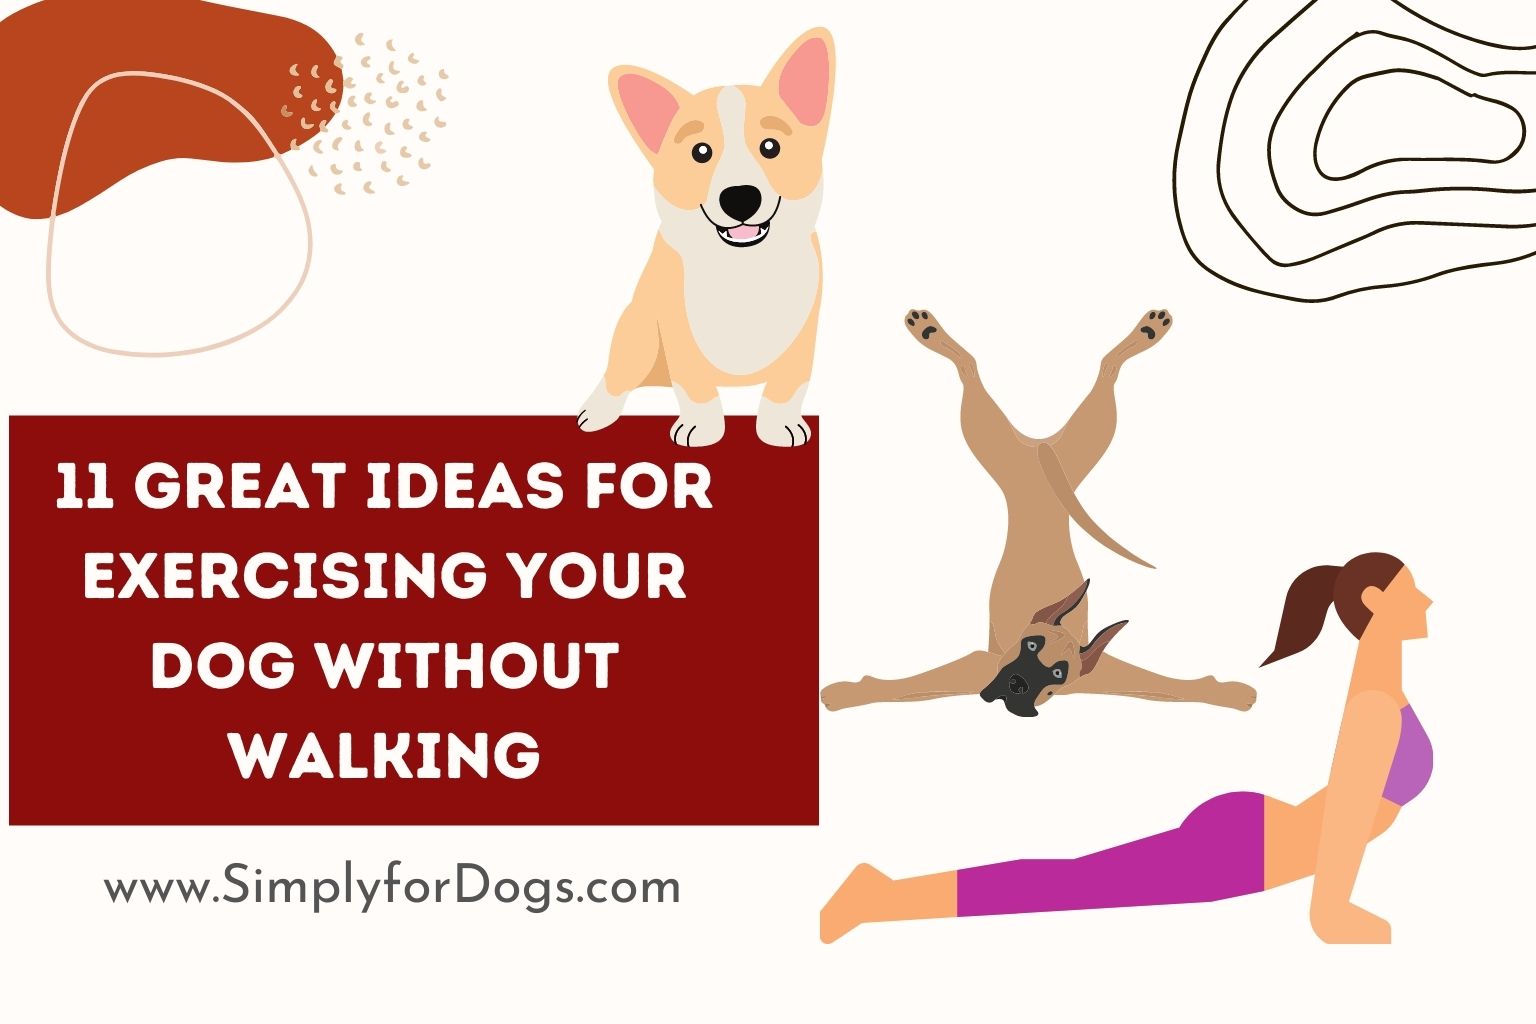 11 Great Ideas for Exercising Your Dog Without Walking